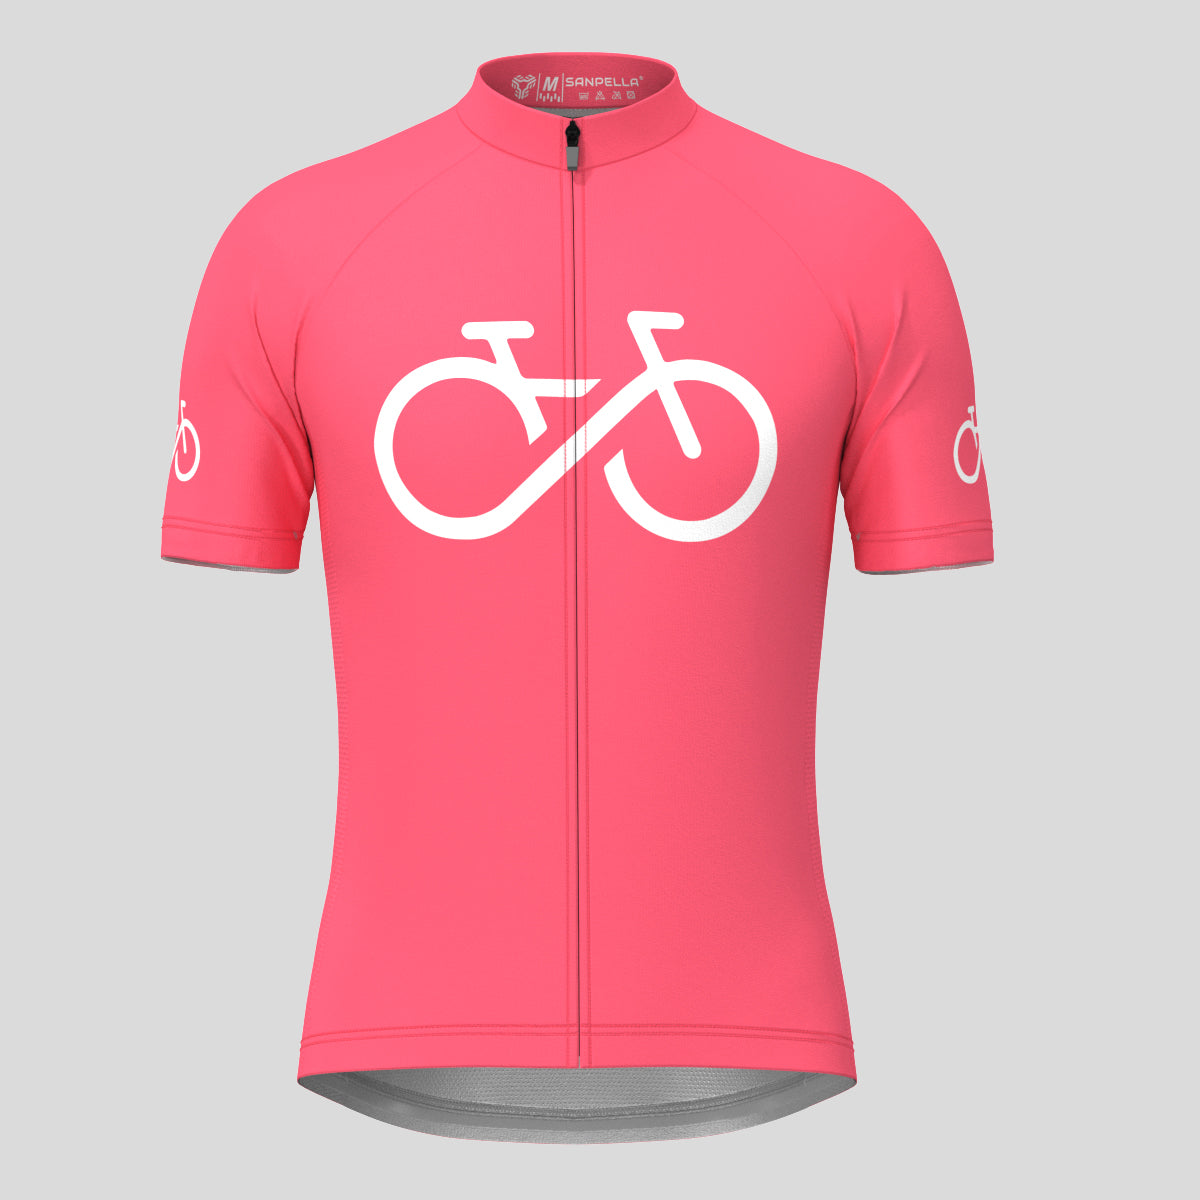 Bike Forever Men's Cycling Jersey - Pink